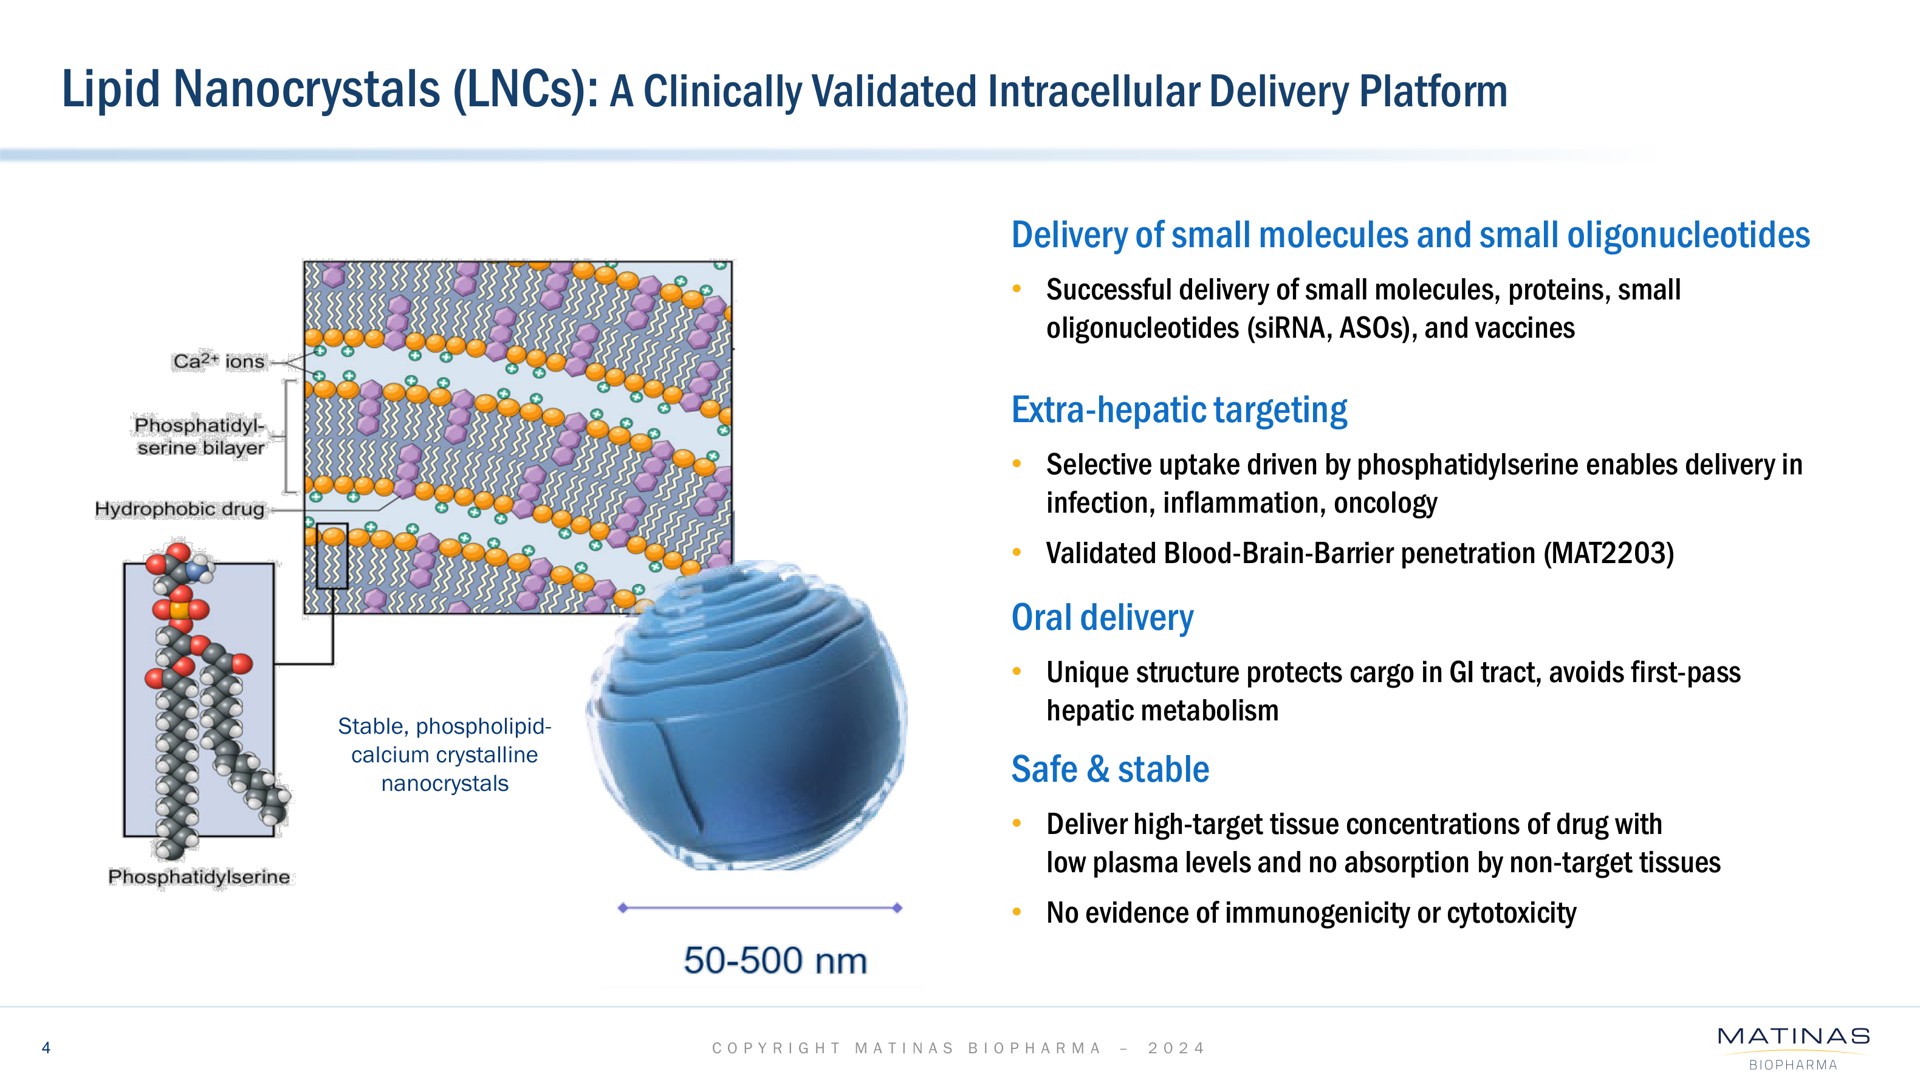 a clinically validated intracellular delivery platform | Matinas BioPharma